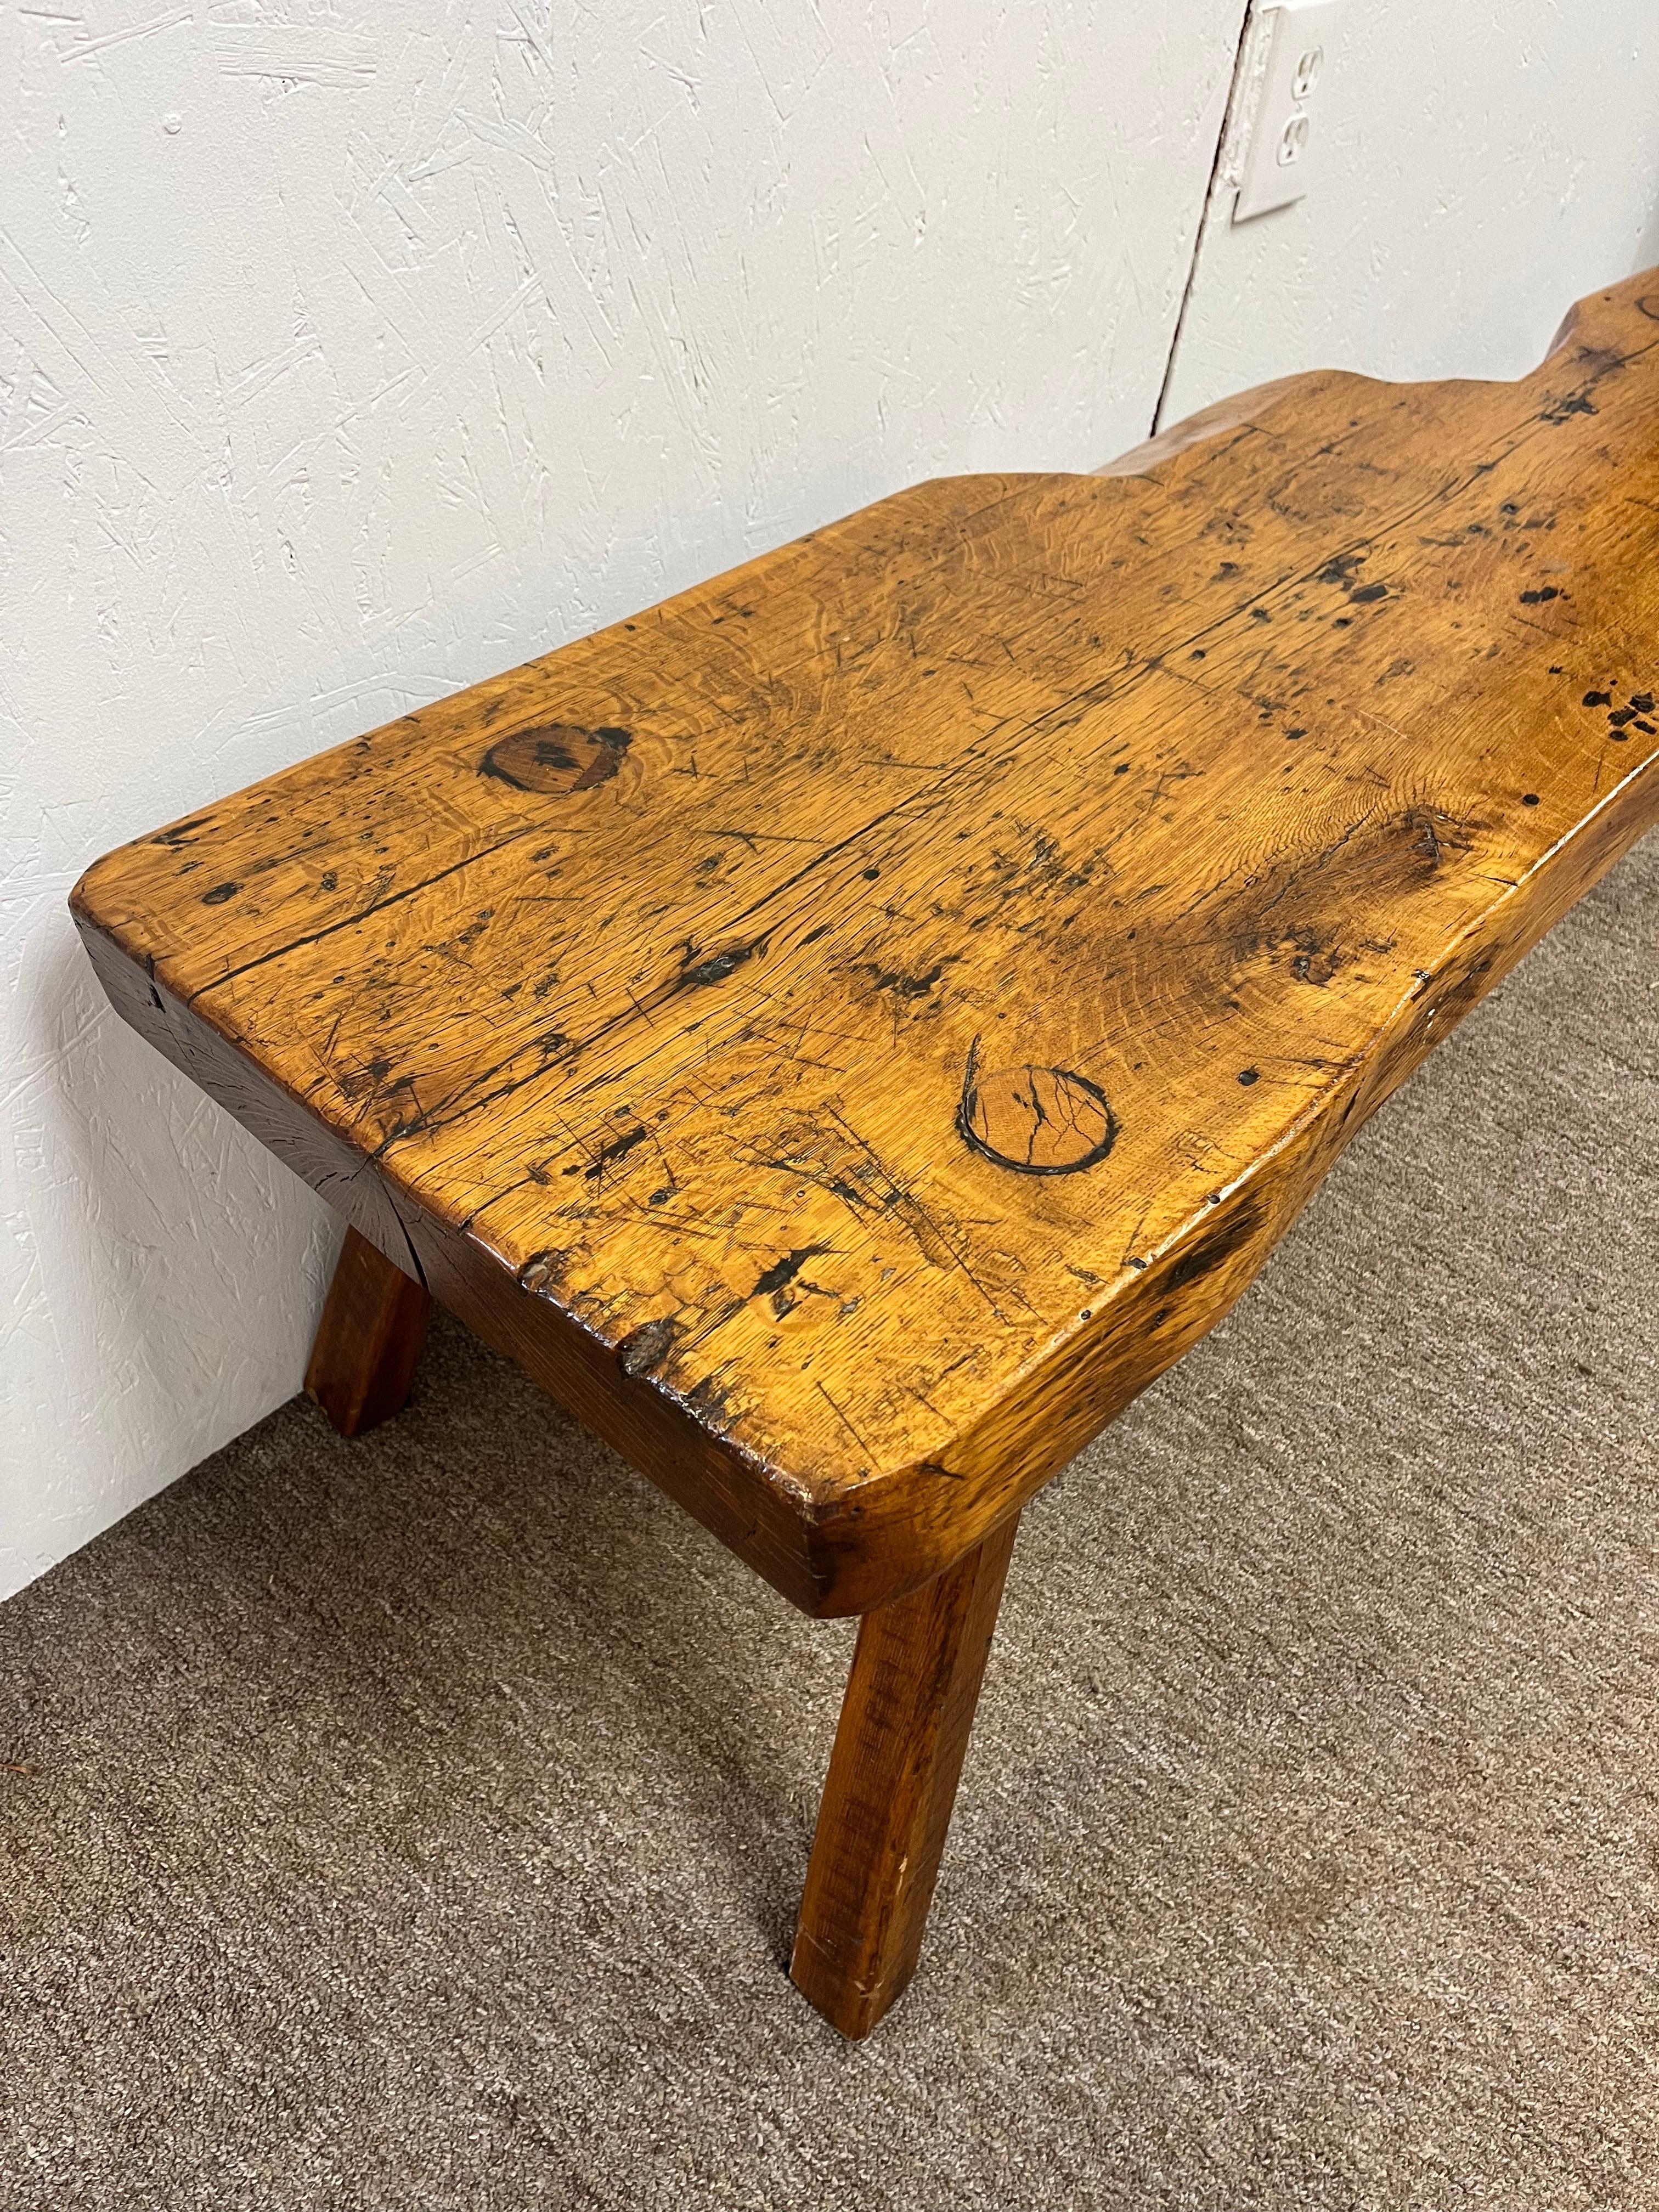 An antique early 19th Century circa 1820's rustic bench hand made from a thick, oversized slab of wood with hand carved and joined splayed legs that run through the seat. The bench seat has a fascinating cut out (if you will) that may have been an